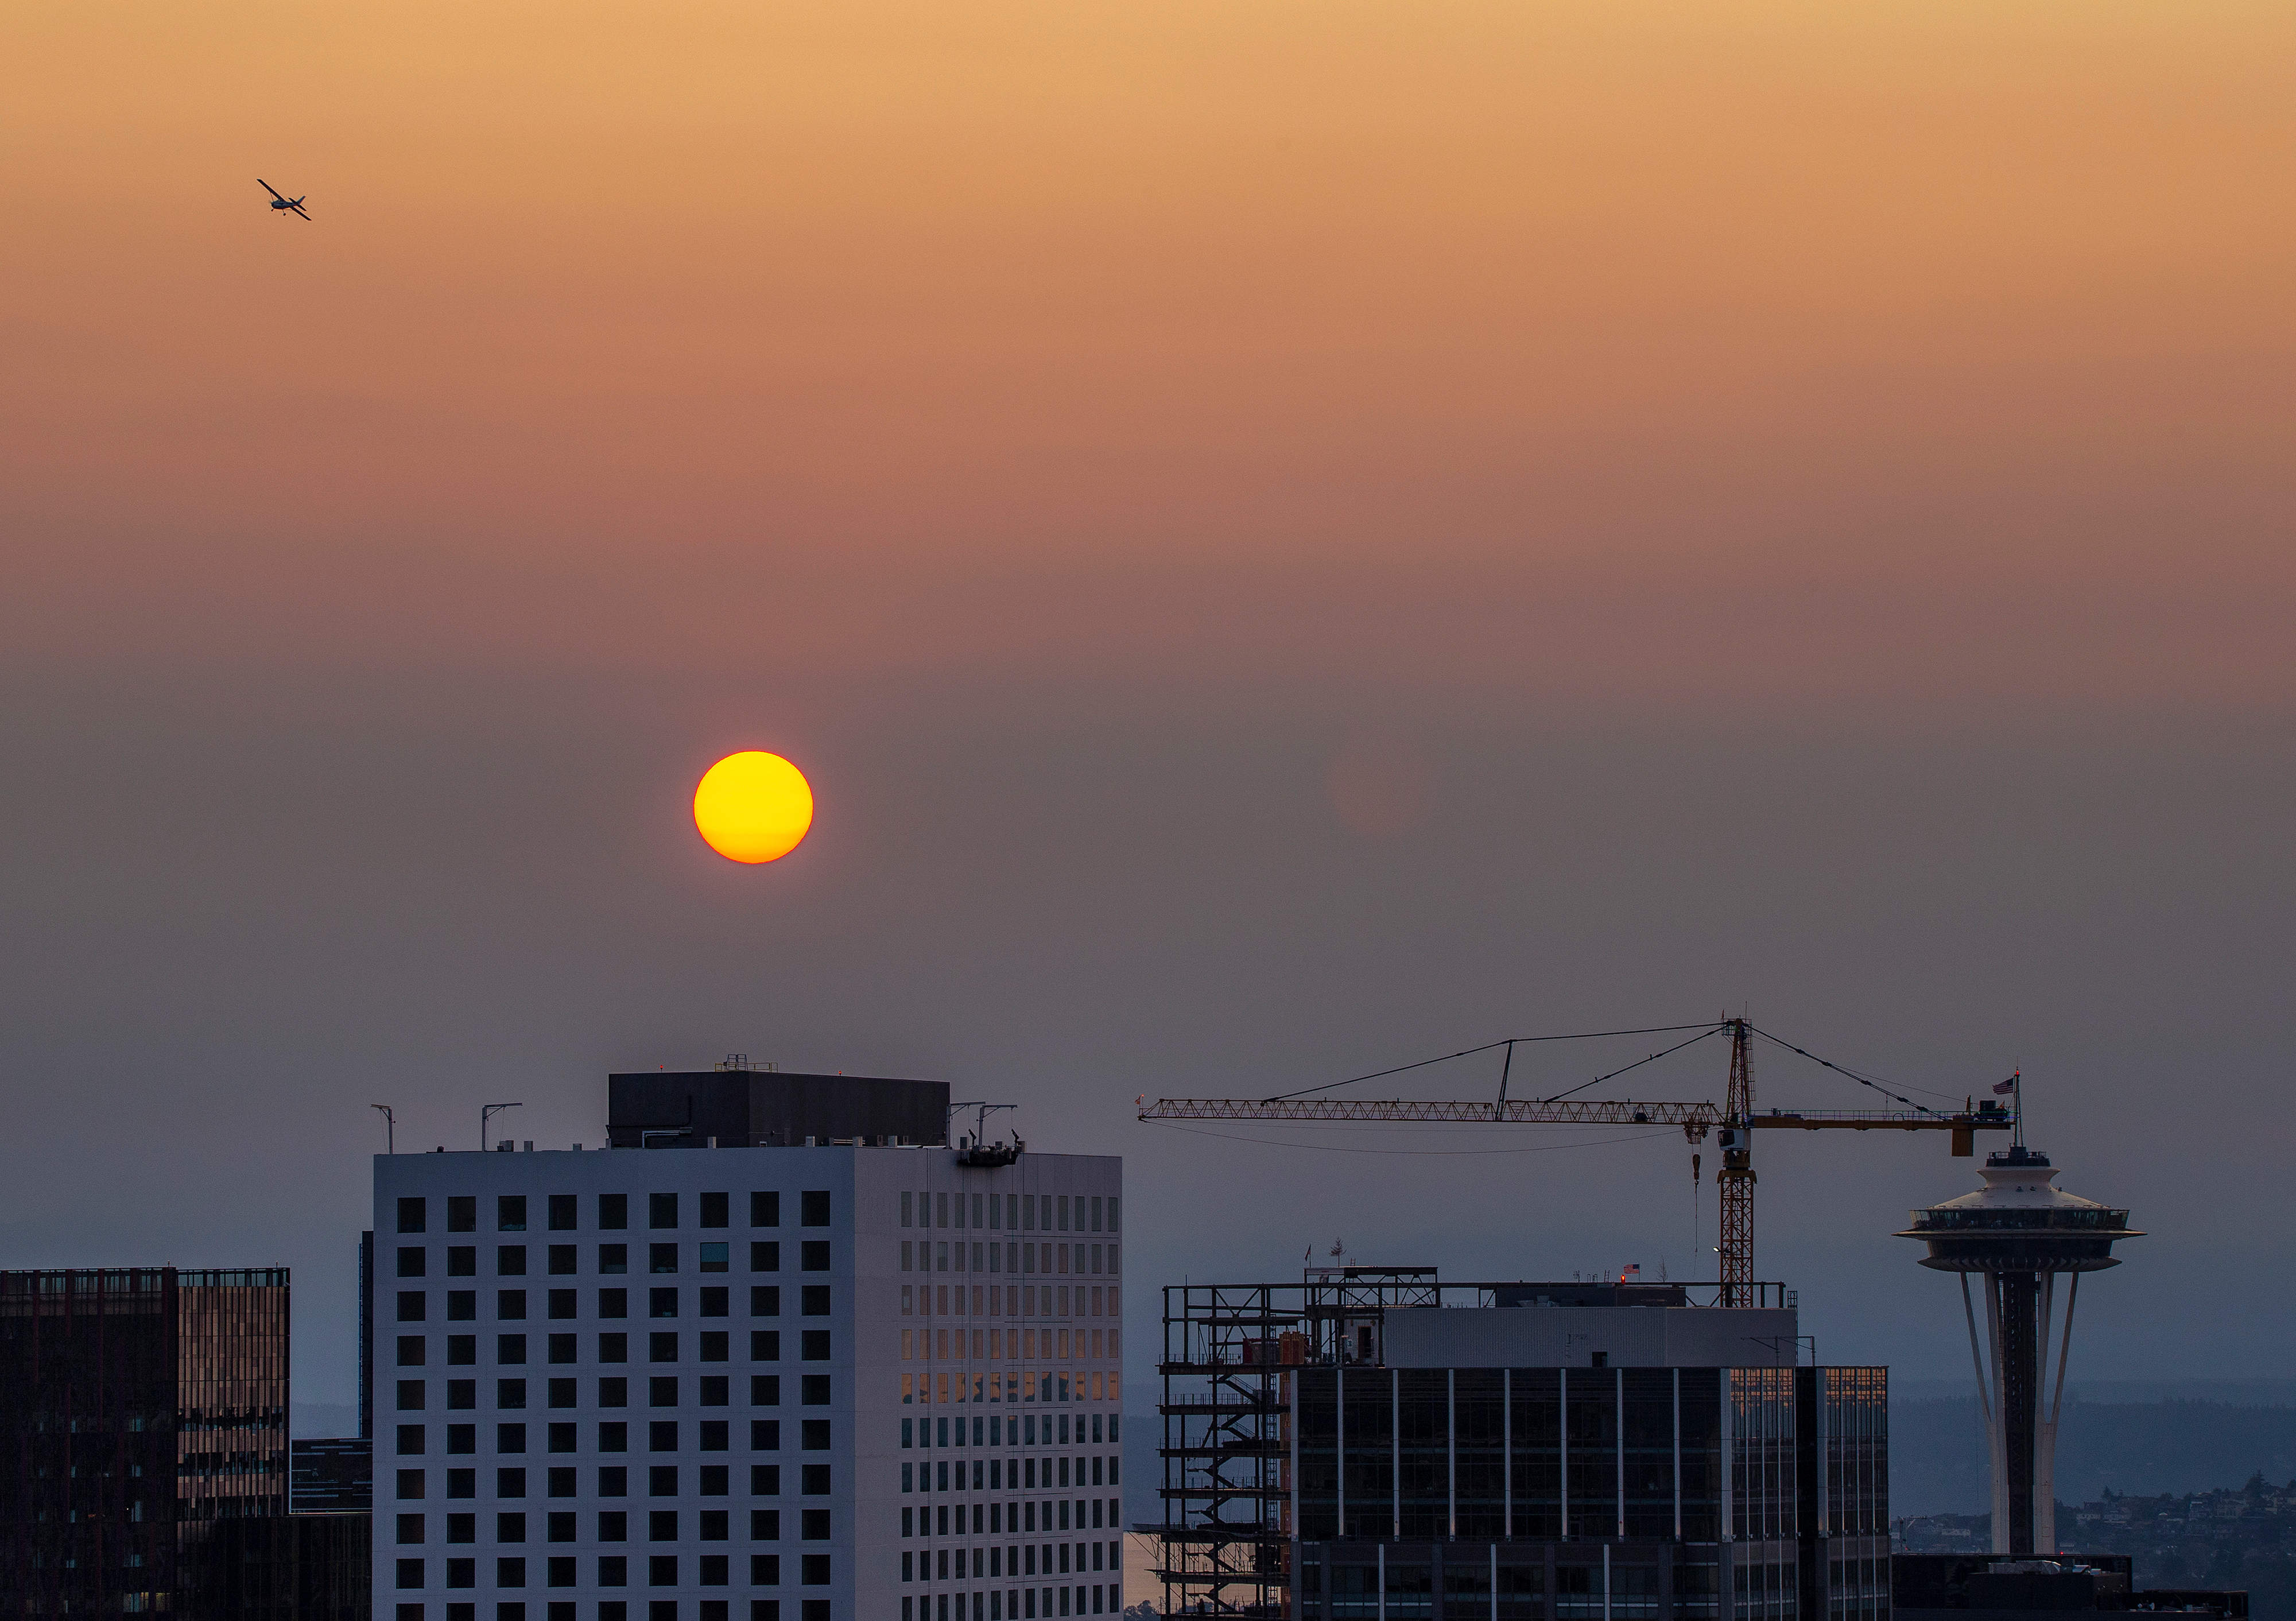 The Space Needle, a construction crane, and some buildings underneath a smoky backdrop, with a red sun.